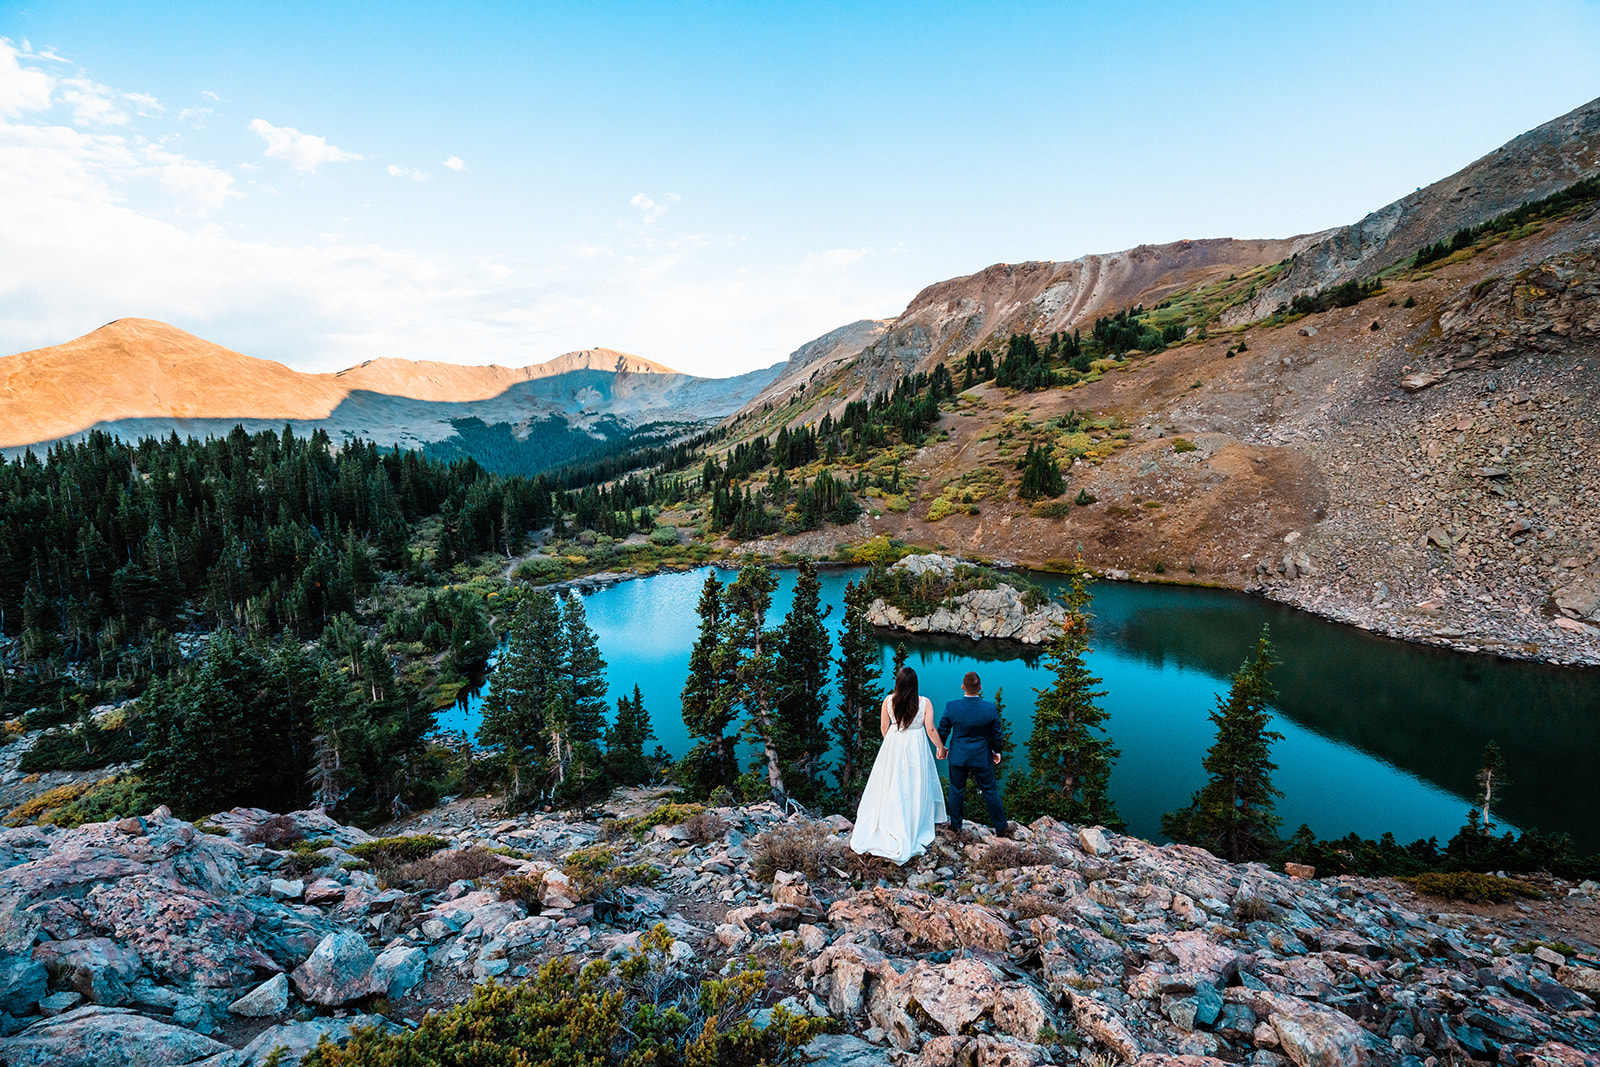 Newlyweds in formal attire holds hands, overlooking a serene blue mountain lake surrounded by lush forests and rocky peaks at sunset during their Buena Vista elopement in Colorado. 